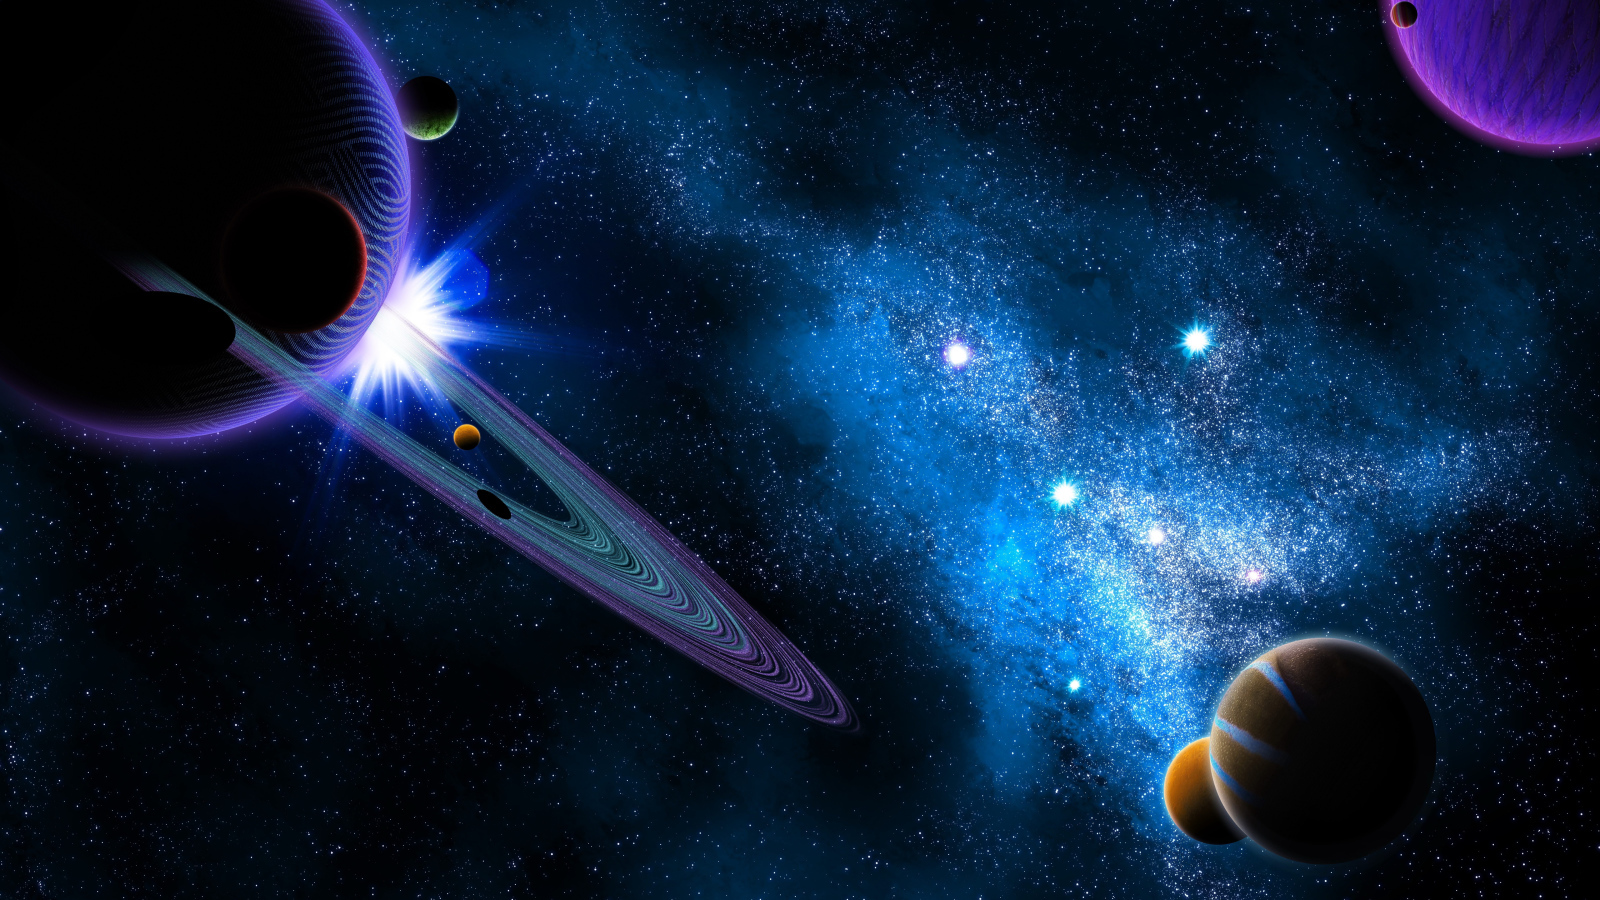 Planets of the solar system in space with the Milky Way